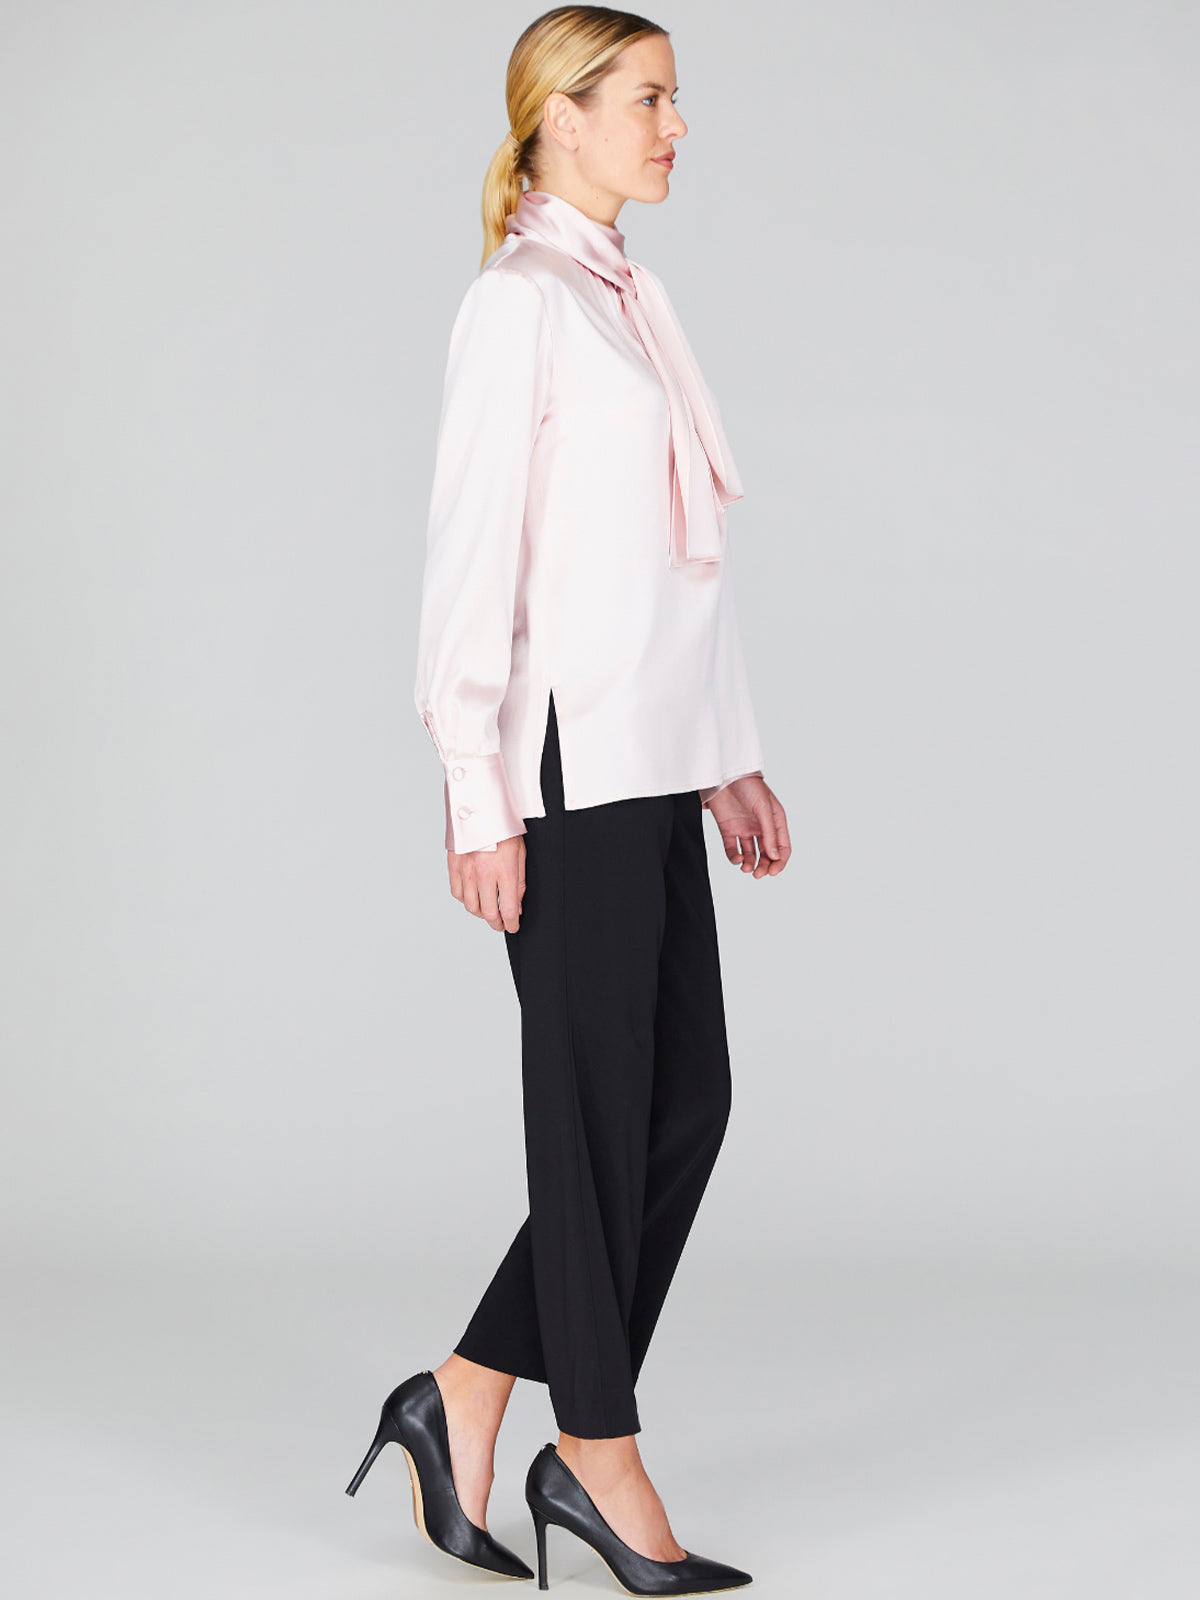 Satin Tie Neck Blouse With Relaxed Sleeves | Petal Satin Tie Neck Blouse With Relaxed Sleeves | Petal